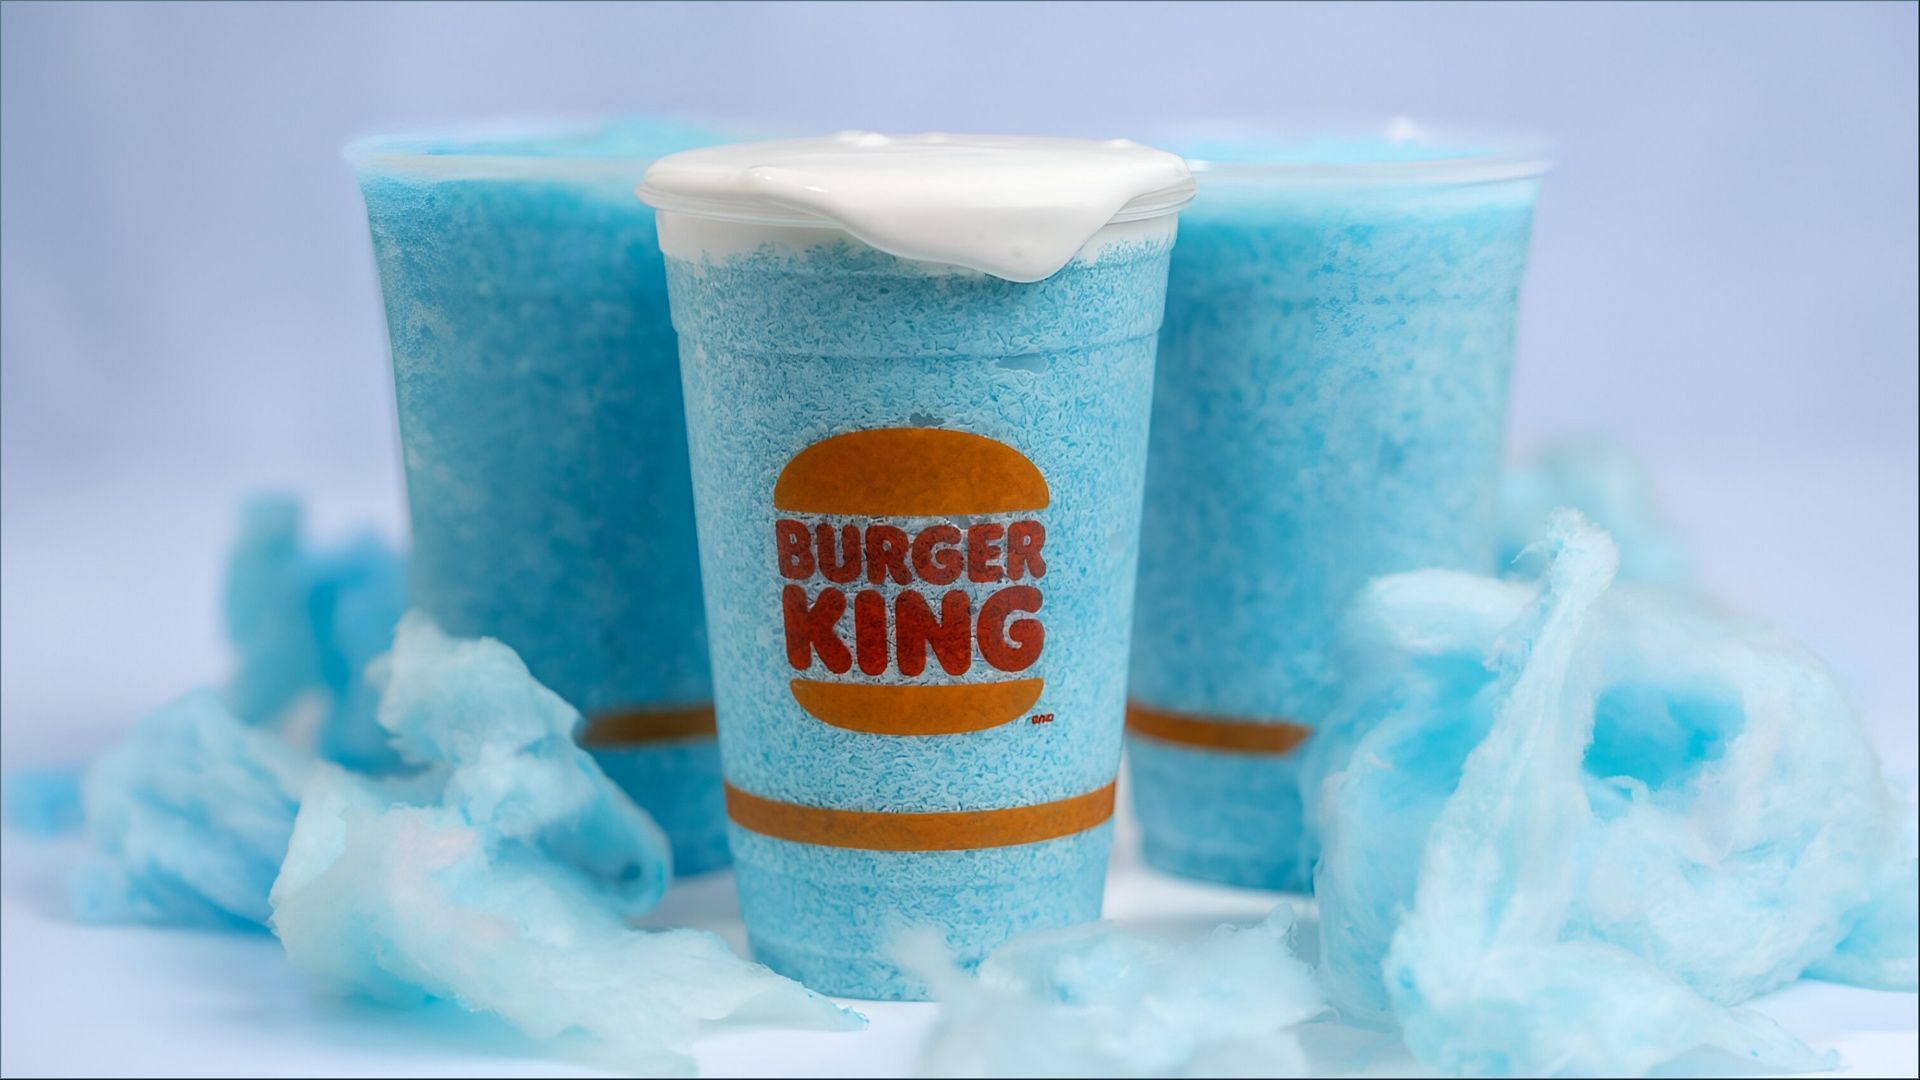 Burger King to launch a new Frozen Cotton Candy beverage on April 11 (Image via Burger King)